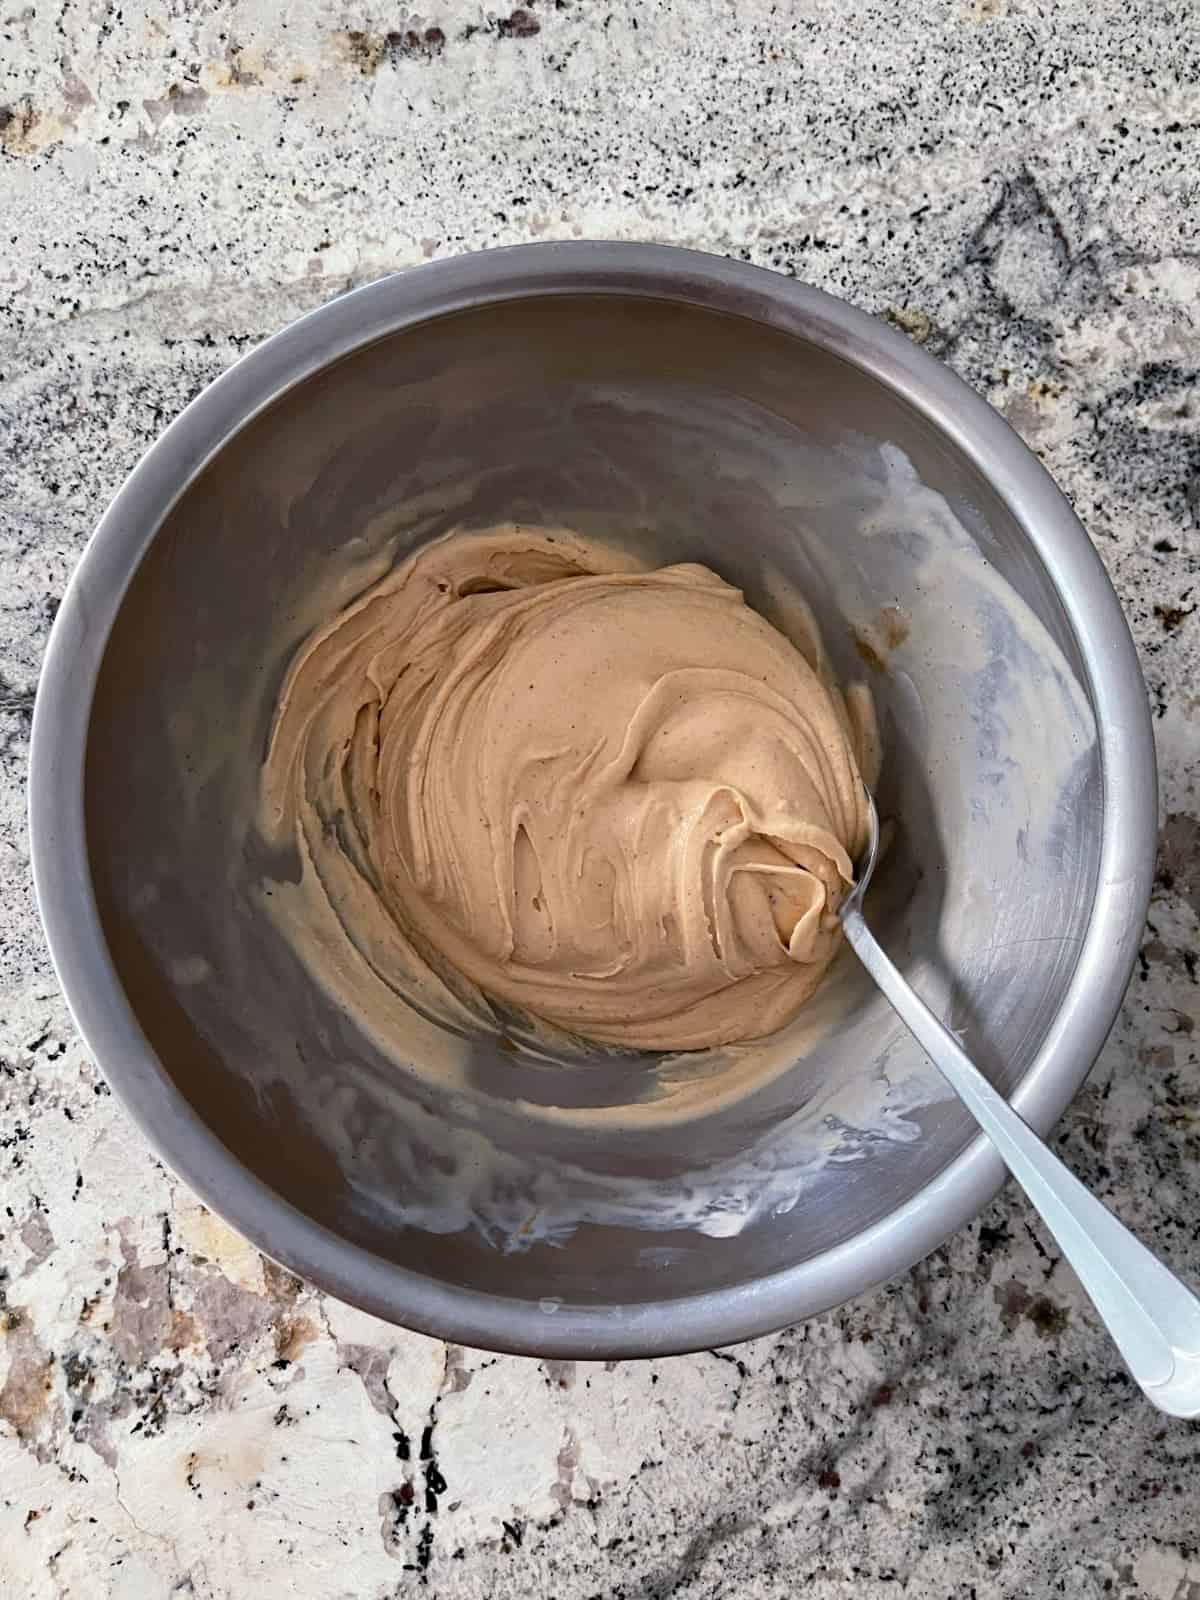 Mix the peanut butter and vanilla ice cream with a spoon in a mixing bowl.